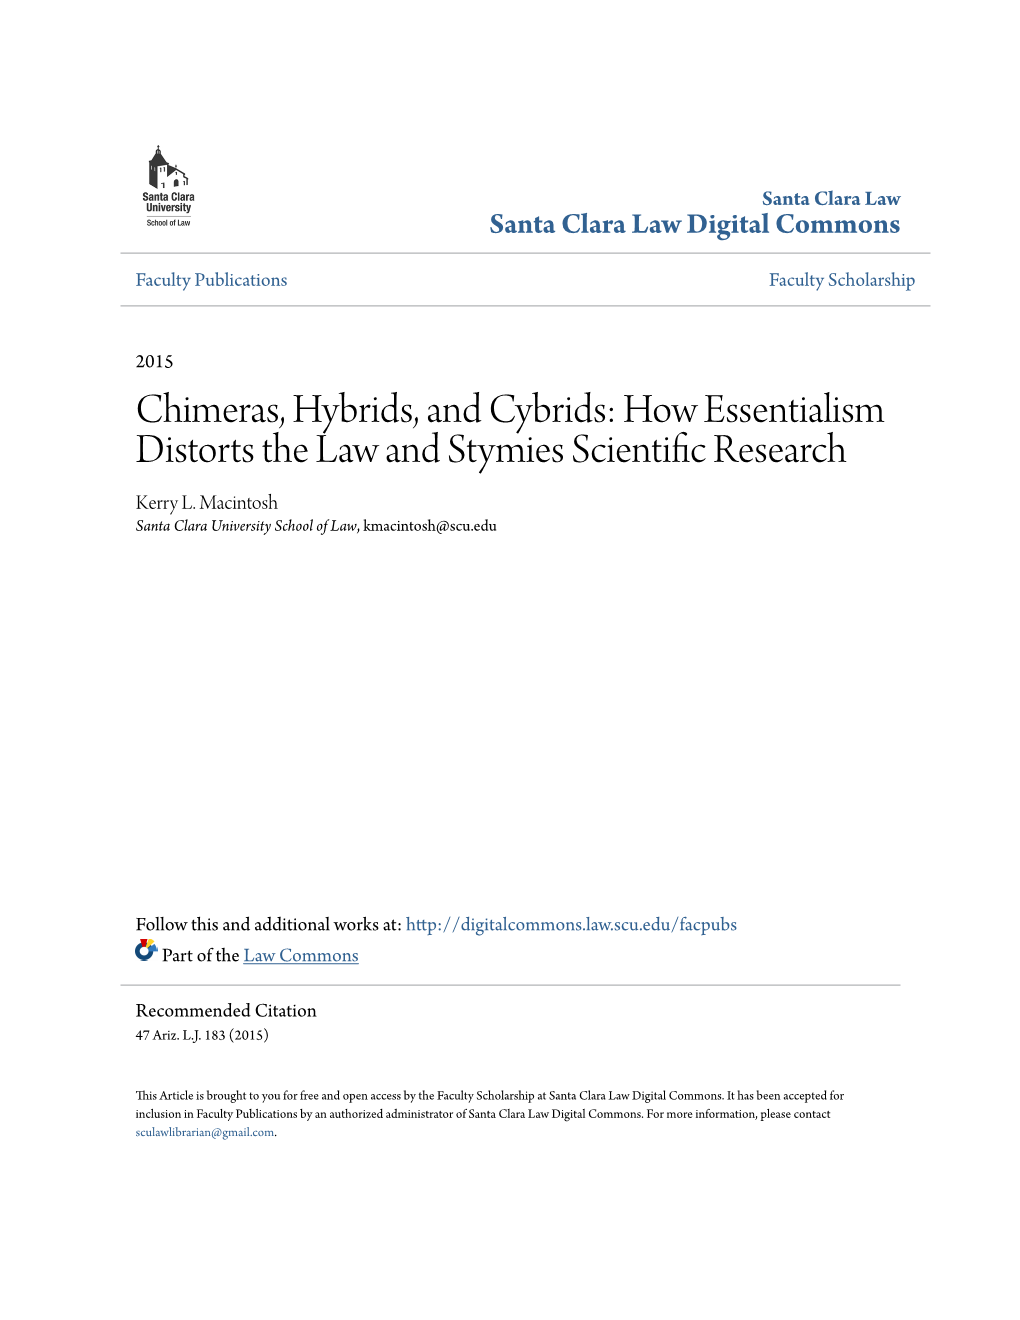 Chimeras, Hybrids, and Cybrids: How Essentialism Distorts the Law and Stymies Scientific Research Kerry L